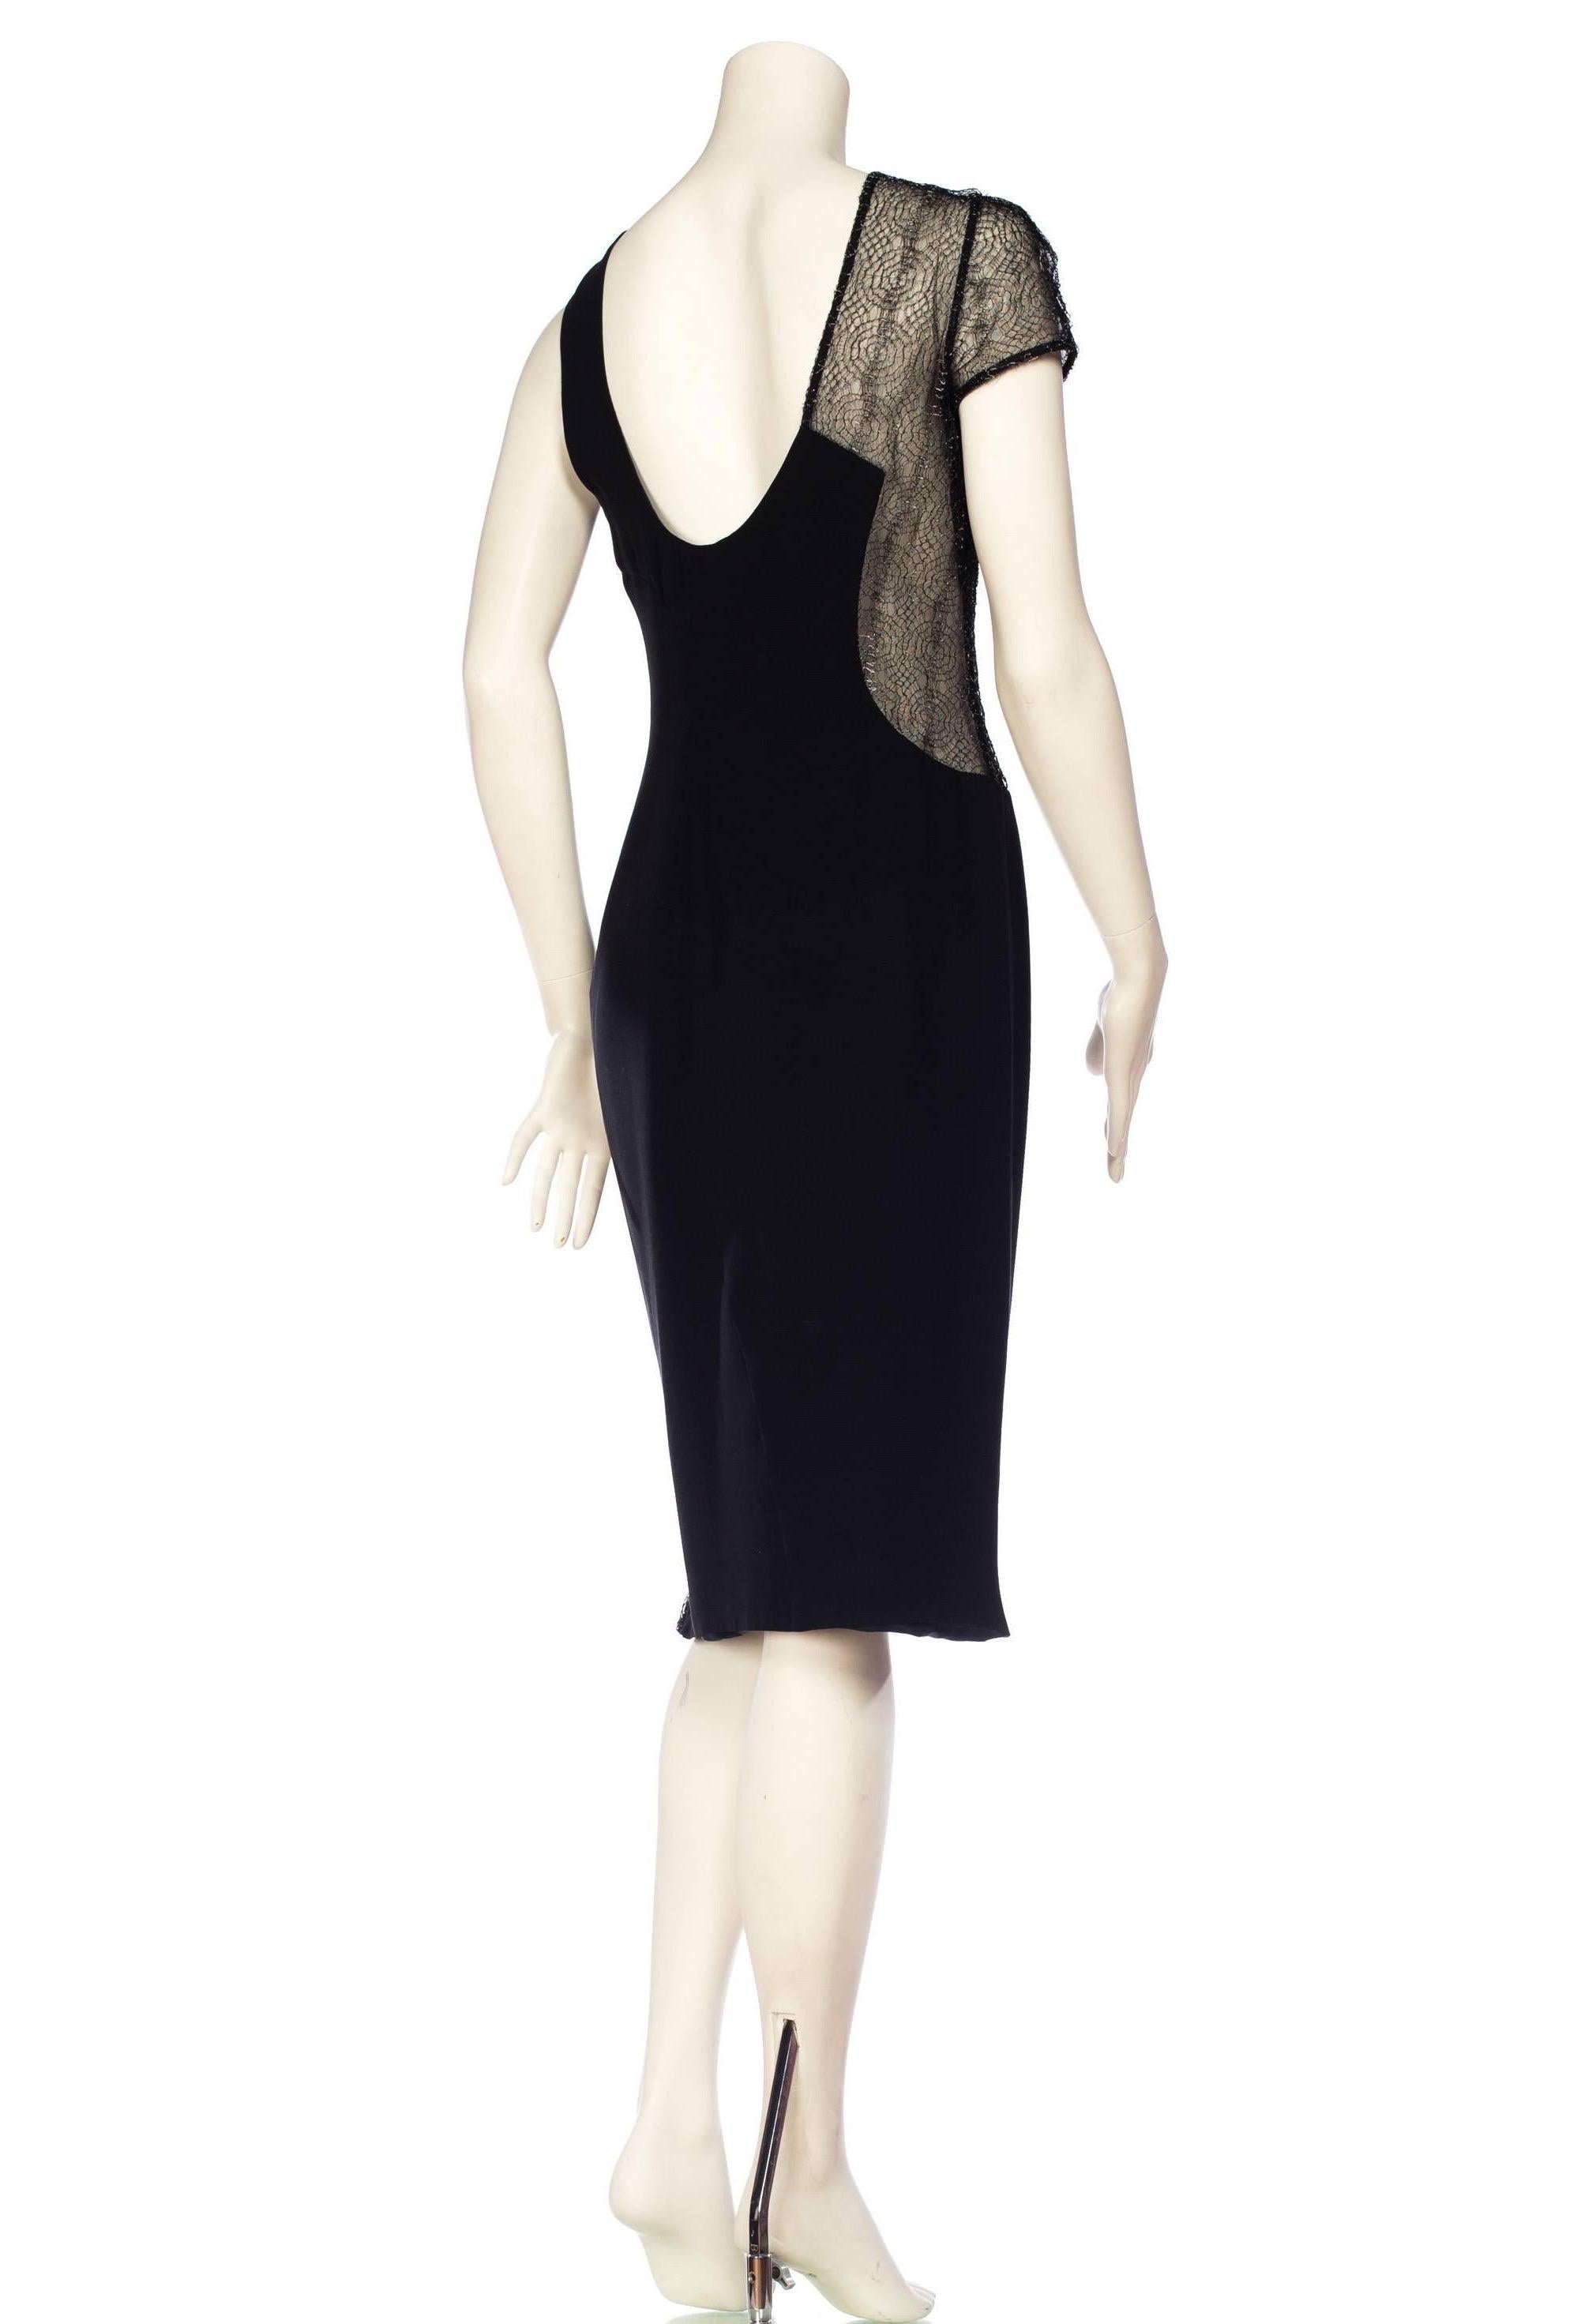 1990S GIANNI VERSACE Black Silk Deconstructed Sexy Modernist Cocktail Dress Wit For Sale 2